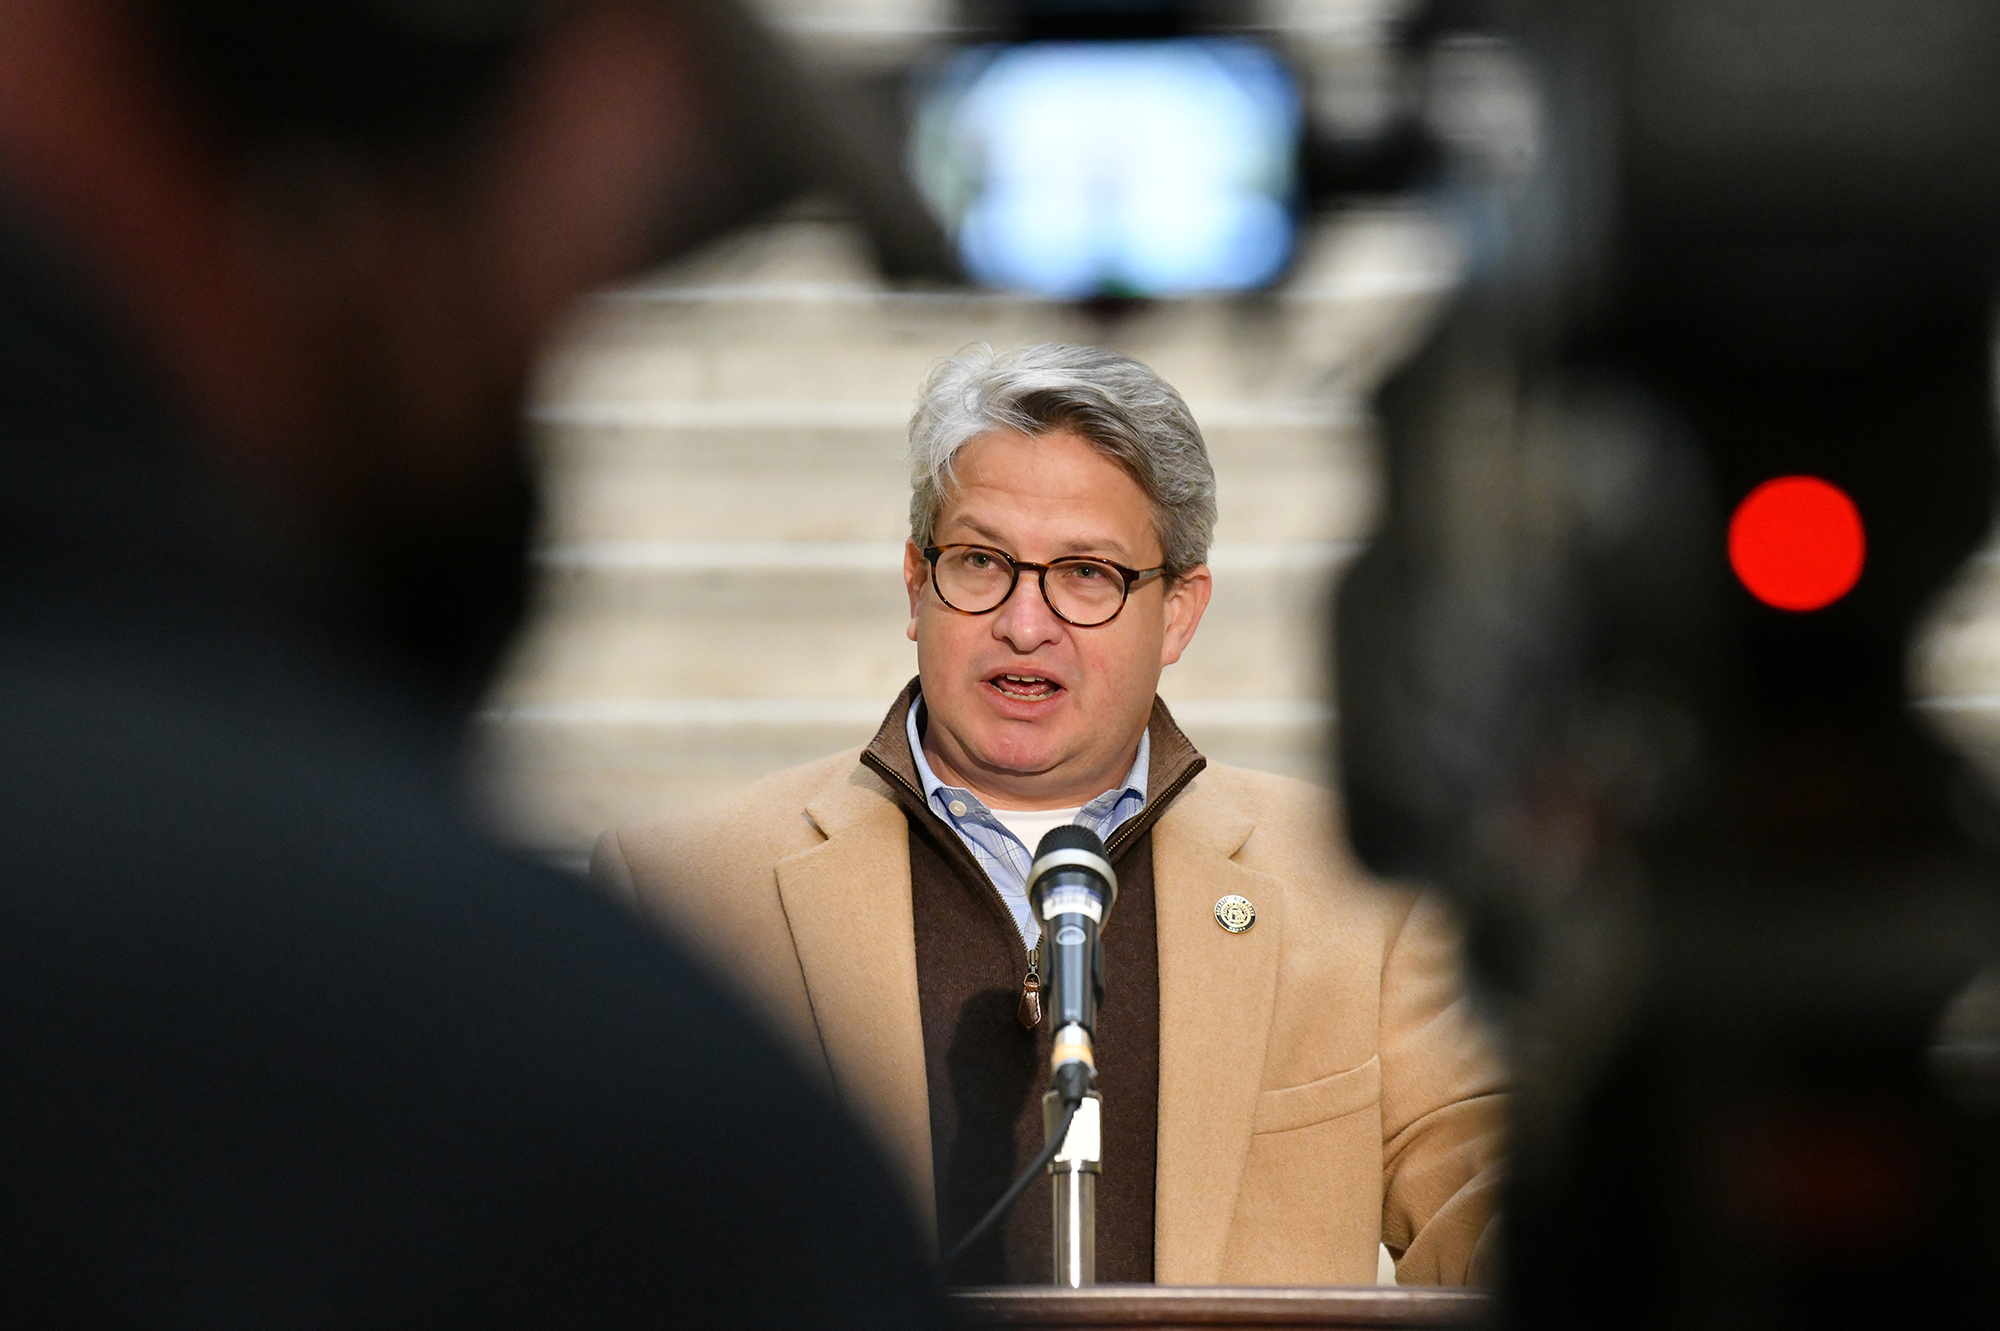 PHOTO: Gabriel Sterling, Voting System Implementation Manager with the Georgia Secretary of State's office, speaks during a news conference at the Georgia State Capitol building in Atlanta, Dec. 1, 2020.